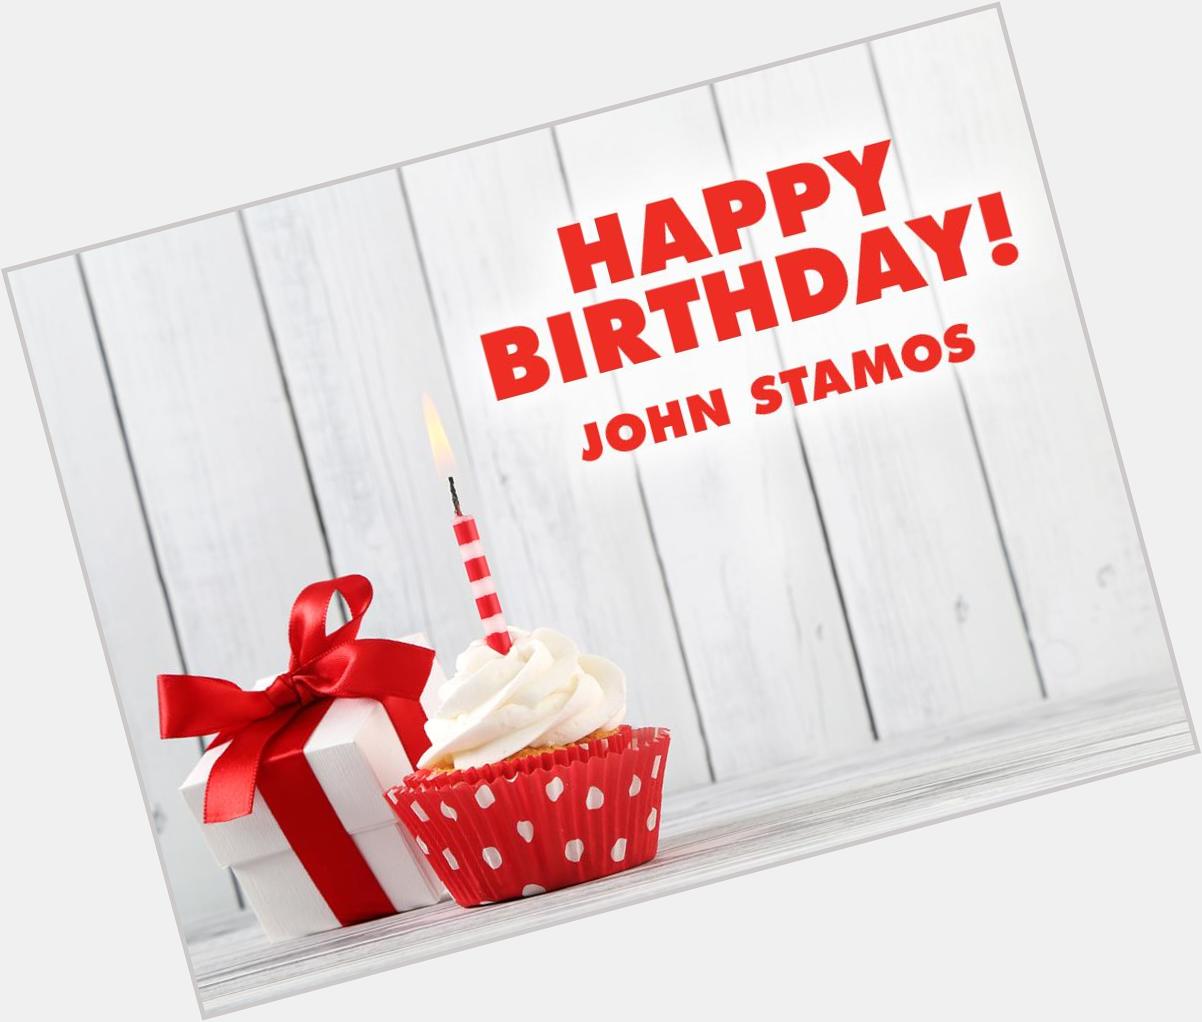 Help us wish our favorite Uncle Jesse a happy birthday! John Stamos celebrates his 55th birthday today. 